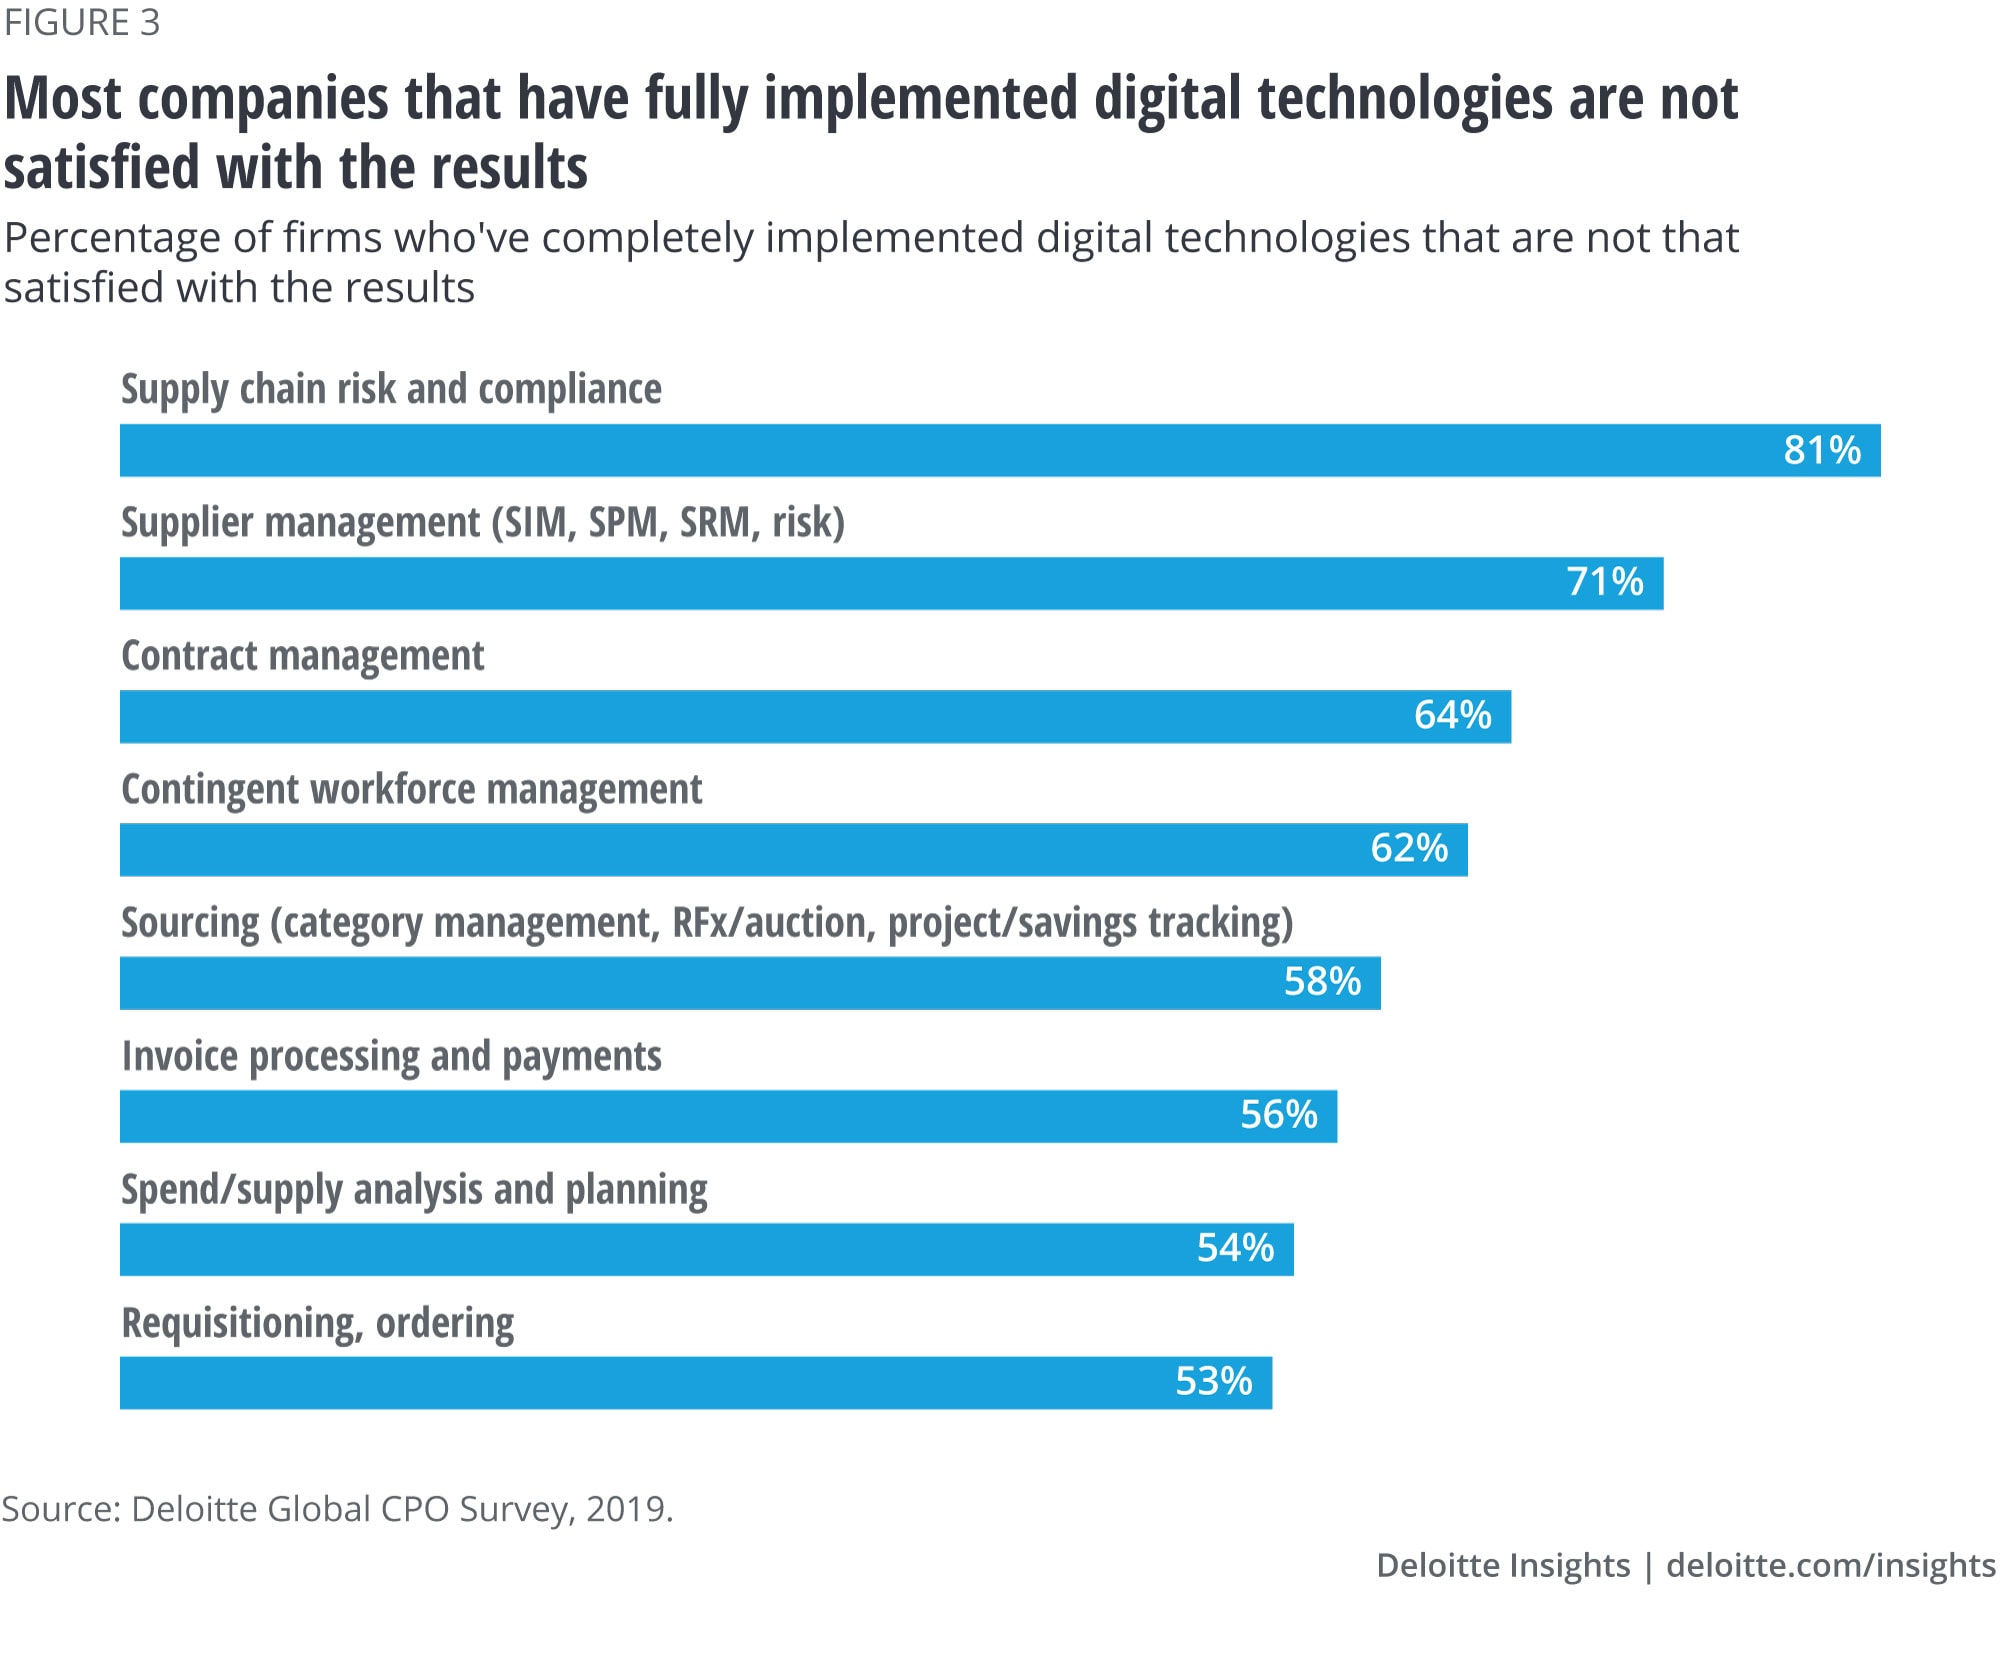 Most companies that have fully implemented digital technologies are not satisfied with the results